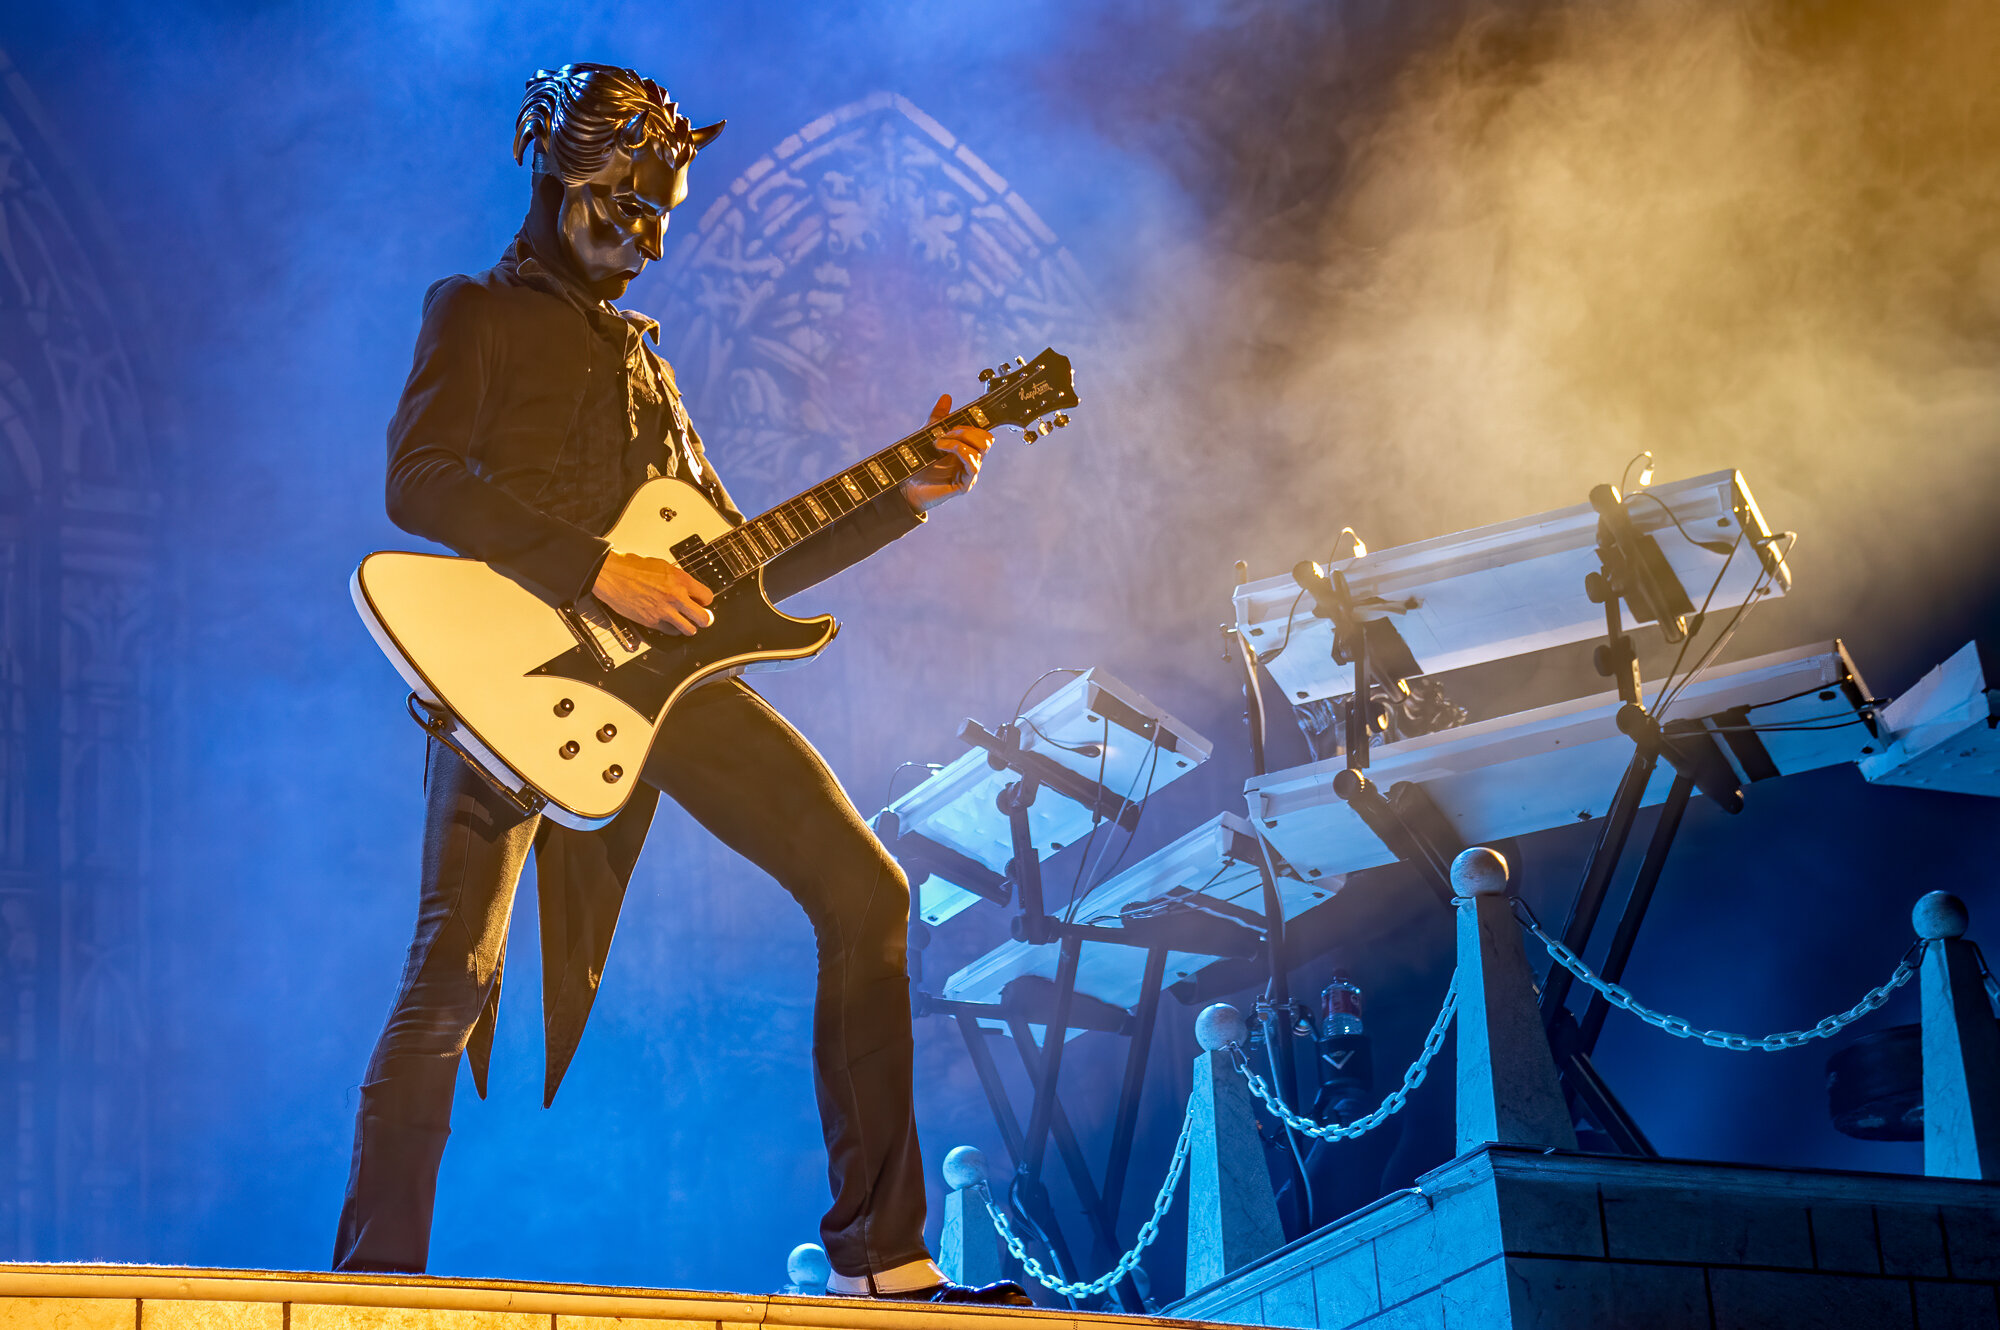 Ghost Live in concert at The SSE Arena, Wembley, November 2019